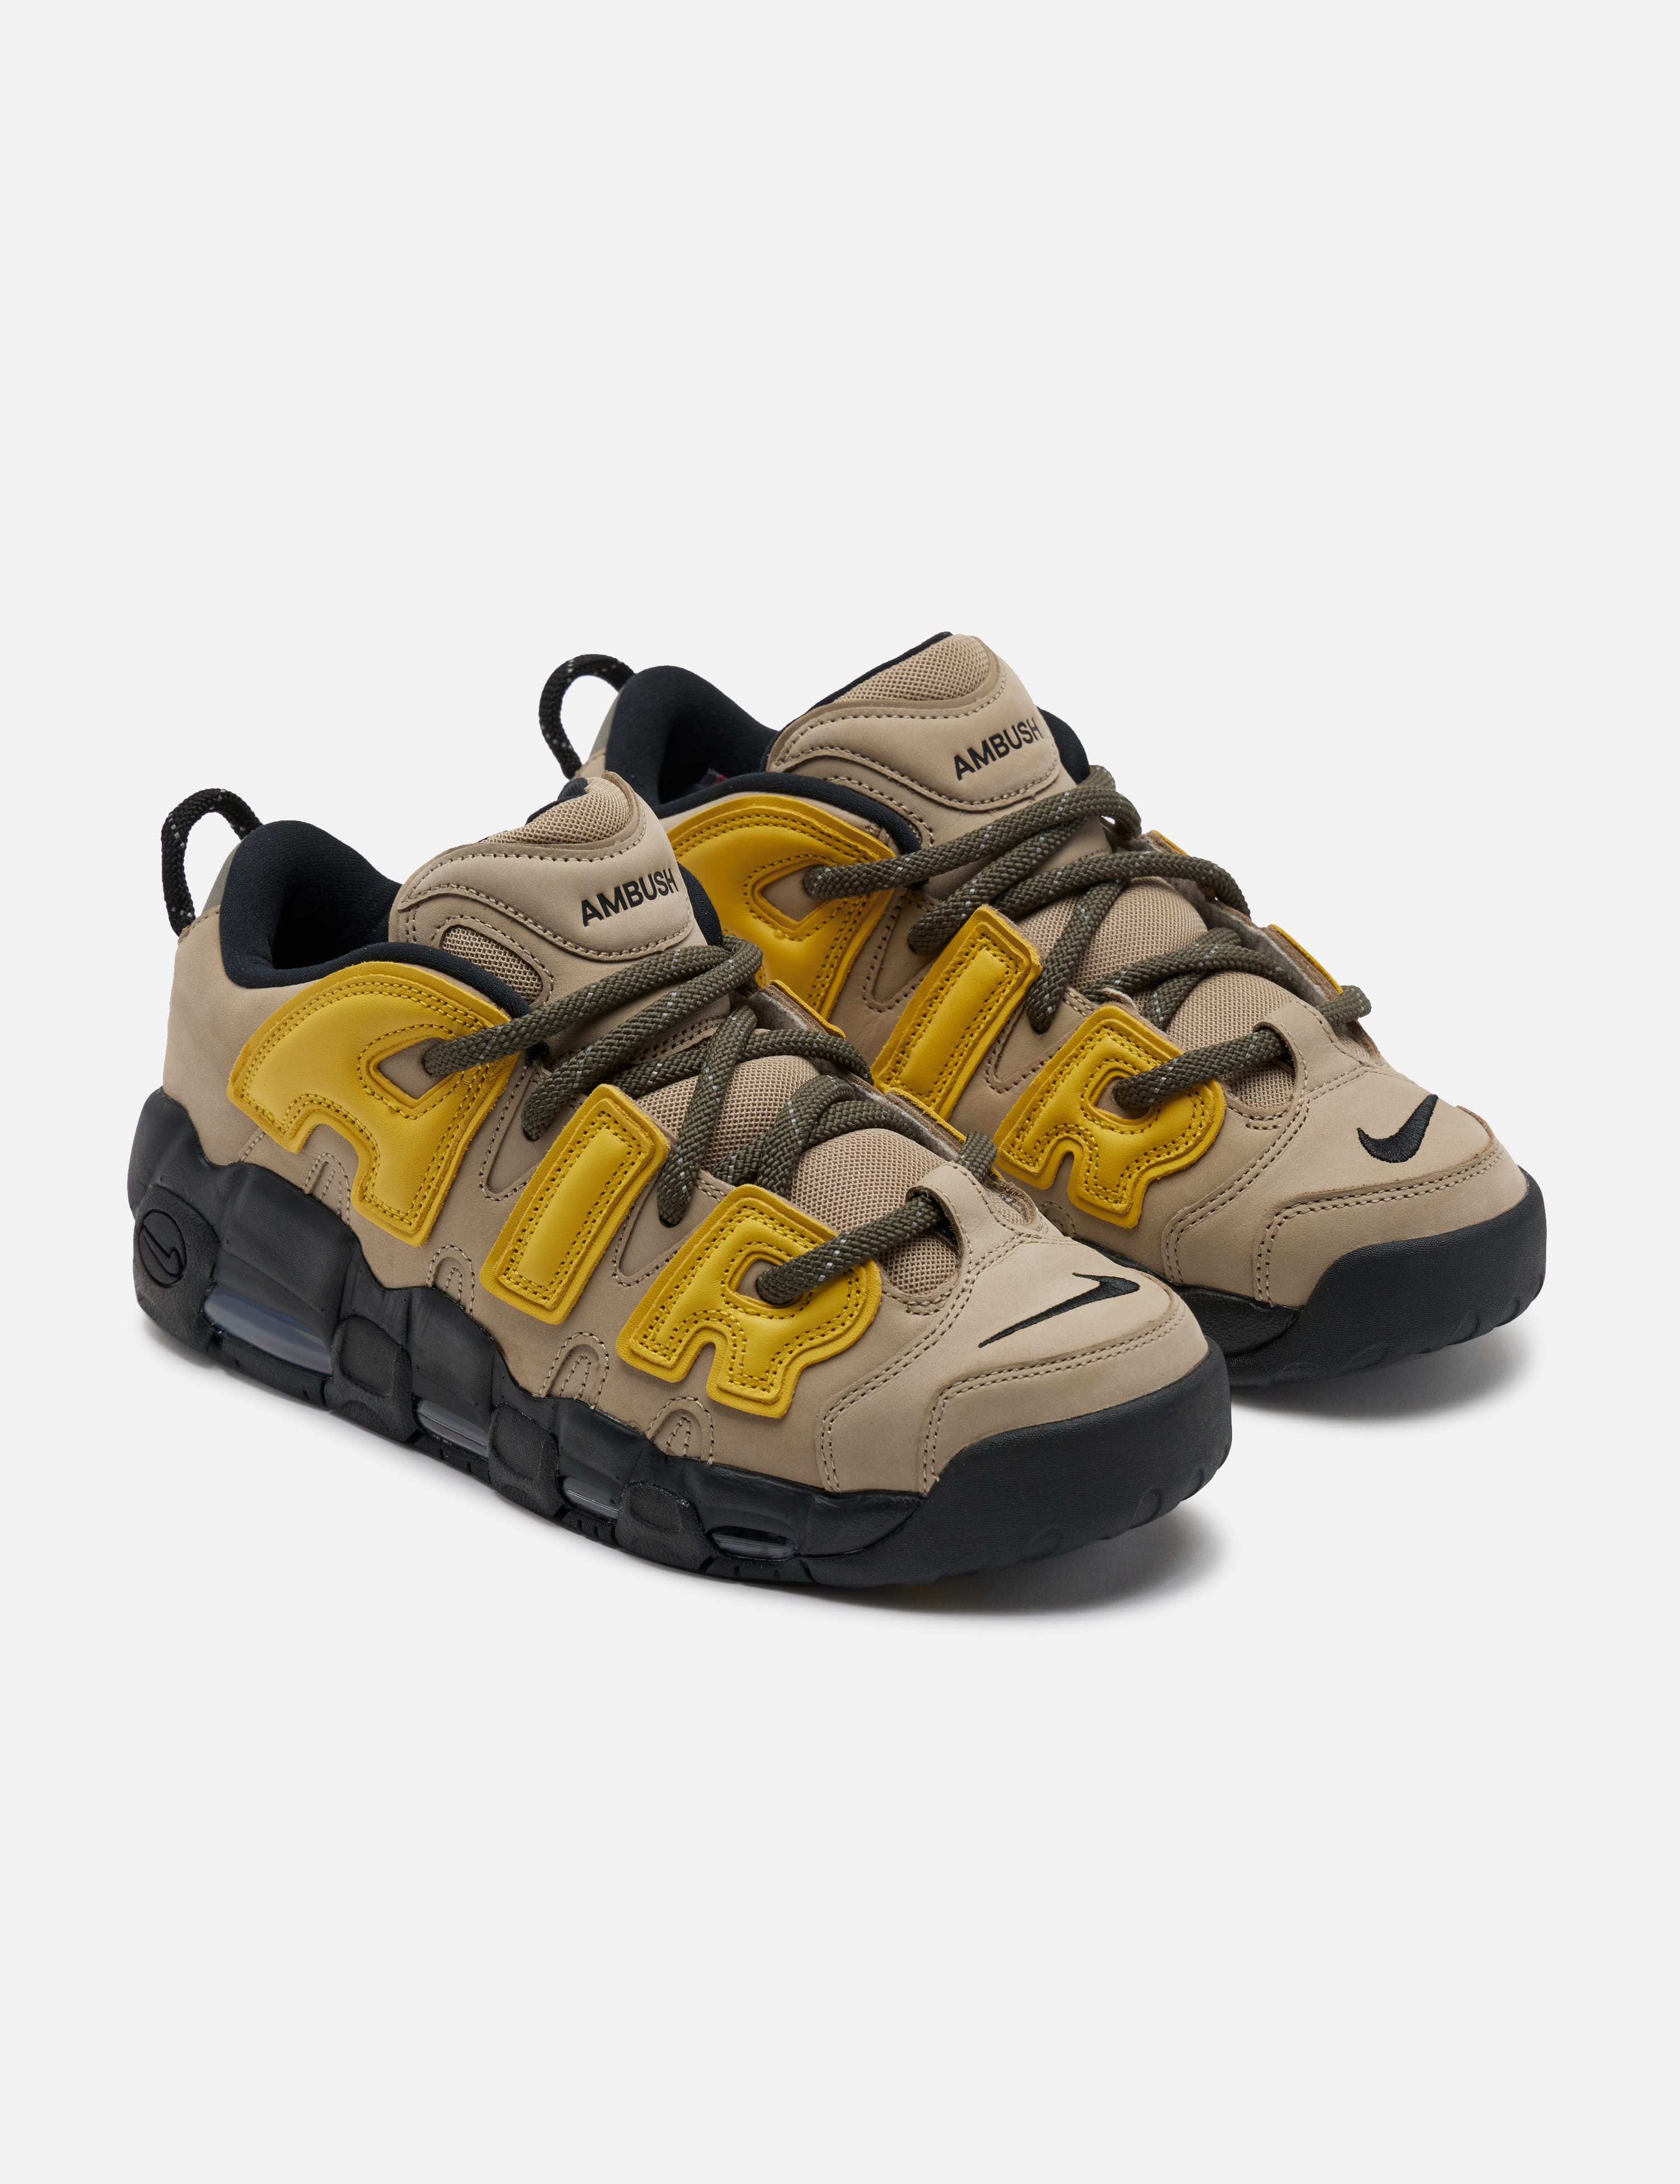 Nike   AMBUSH x Nike Air More Uptempo Low   HBX   Globally Curated